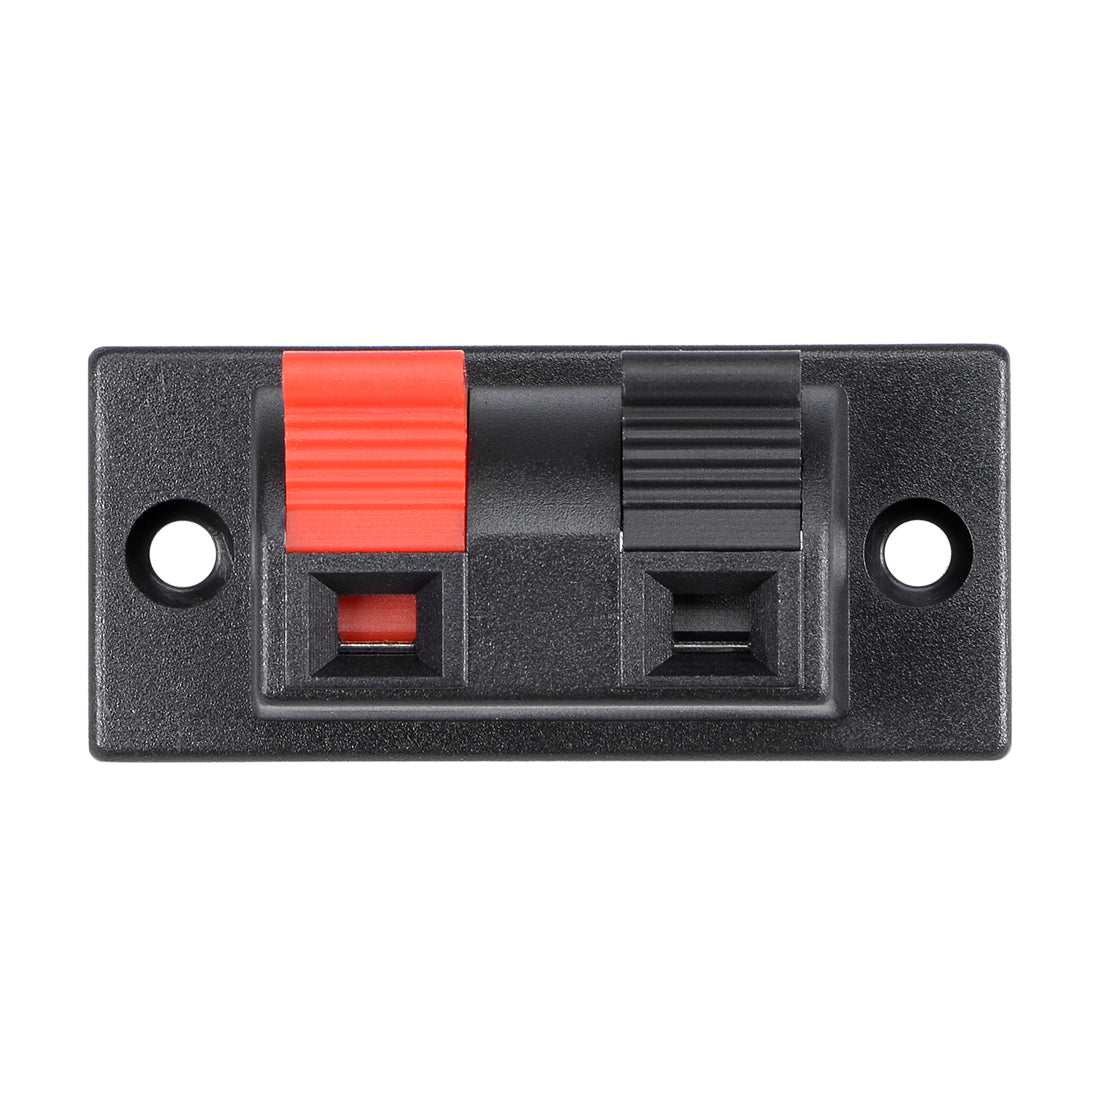 uxcell Uxcell 3pcs 2 Way Jack Socket Spring Push Release Connector Speaker Terminal Strip Block